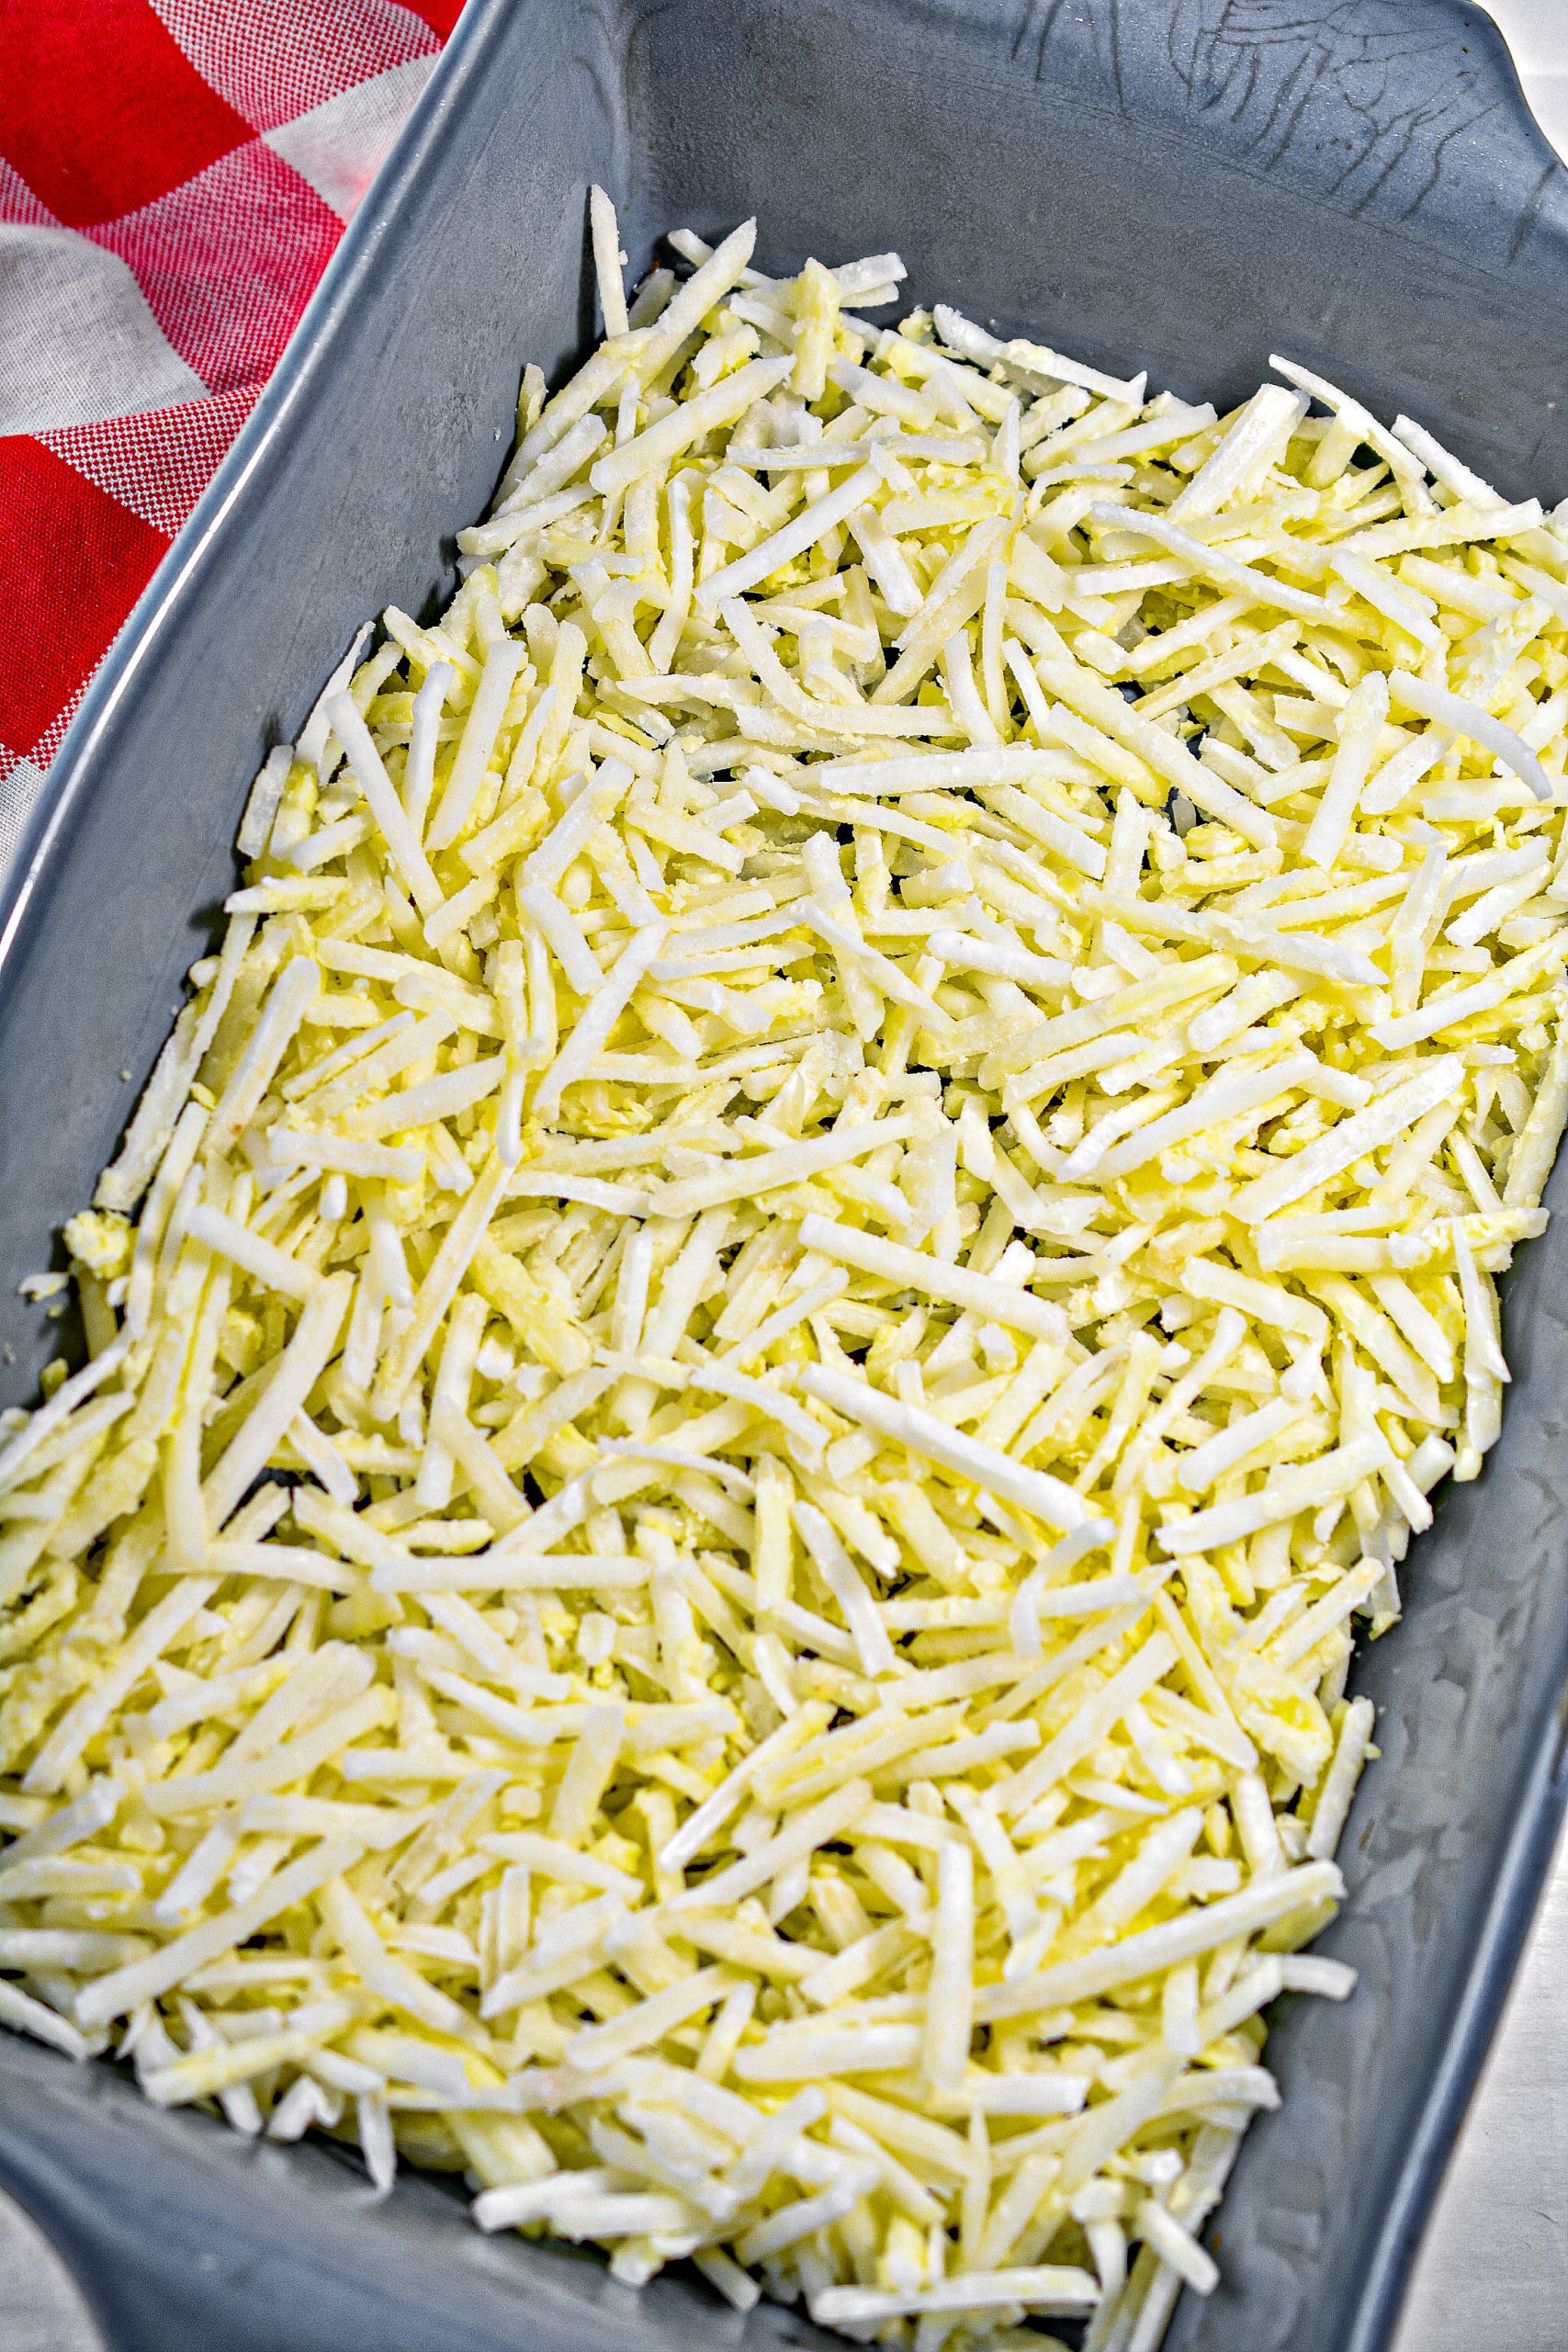 Mix together the hashbrowns and butter, and place into the bottom of a well-greased baking dish.